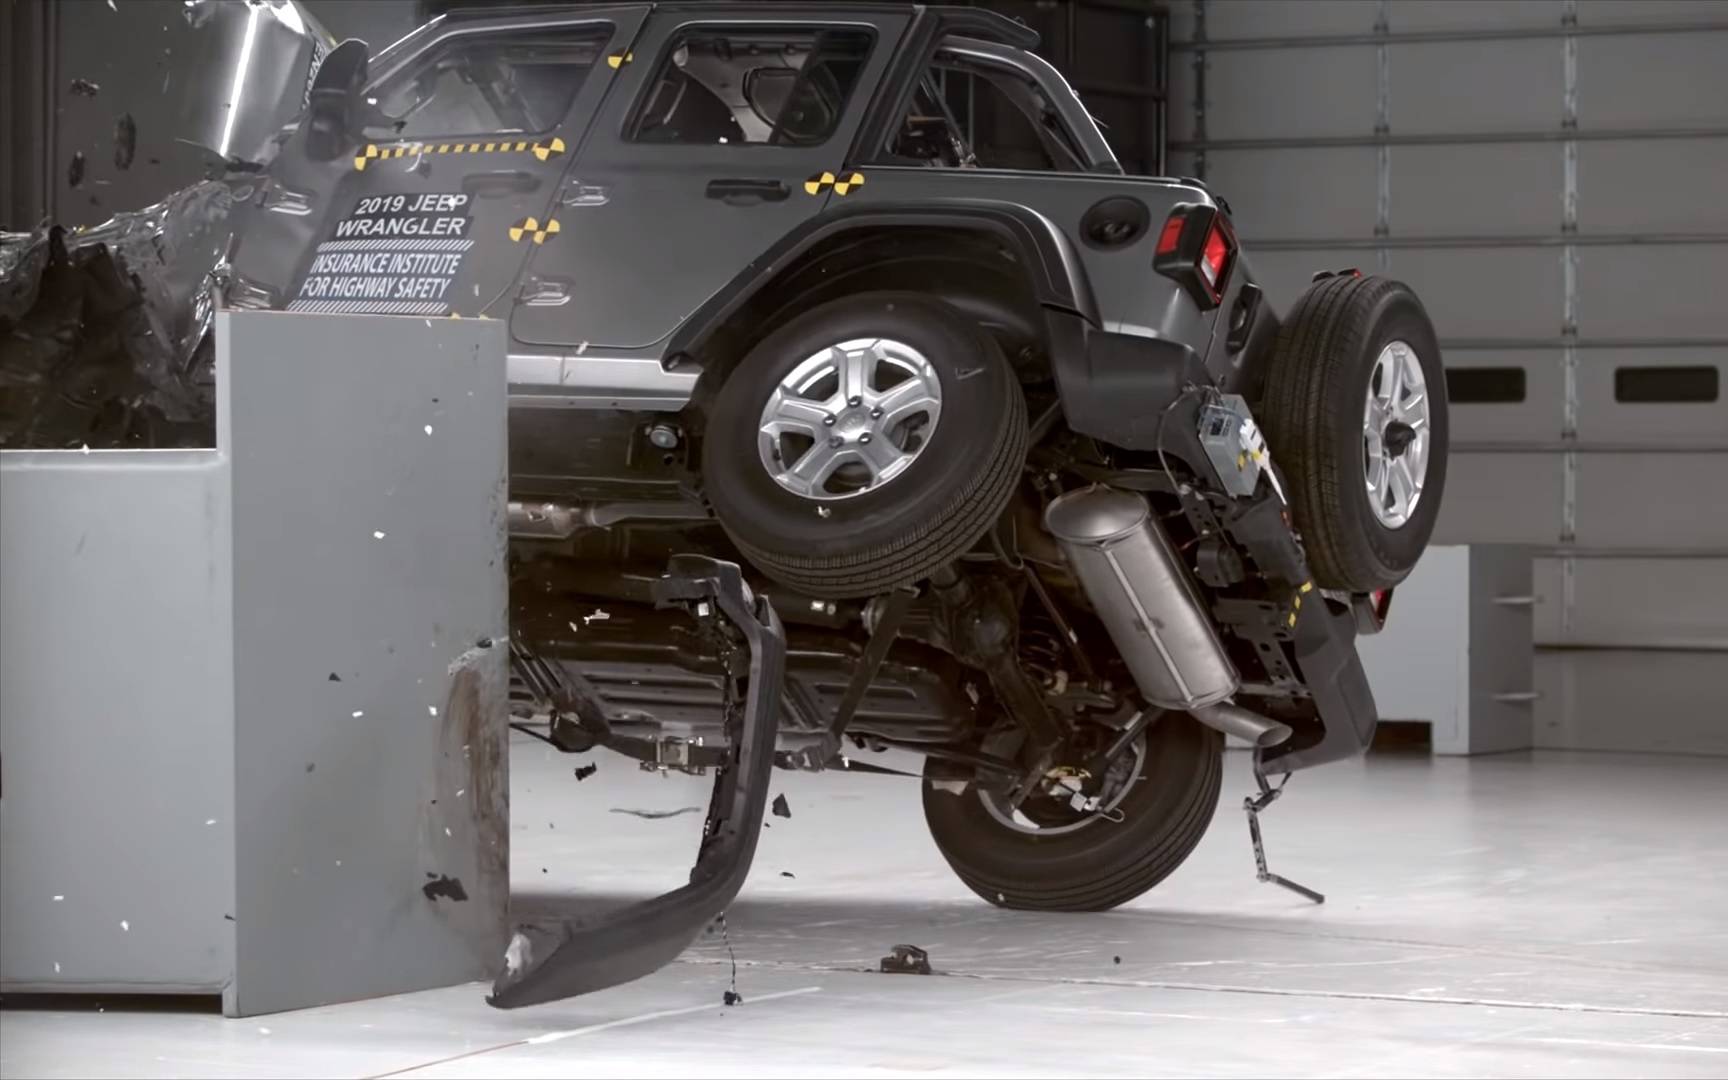 Watch: Jeep Wrangler Rolls Over in Latest Crash Test - The Car Guide